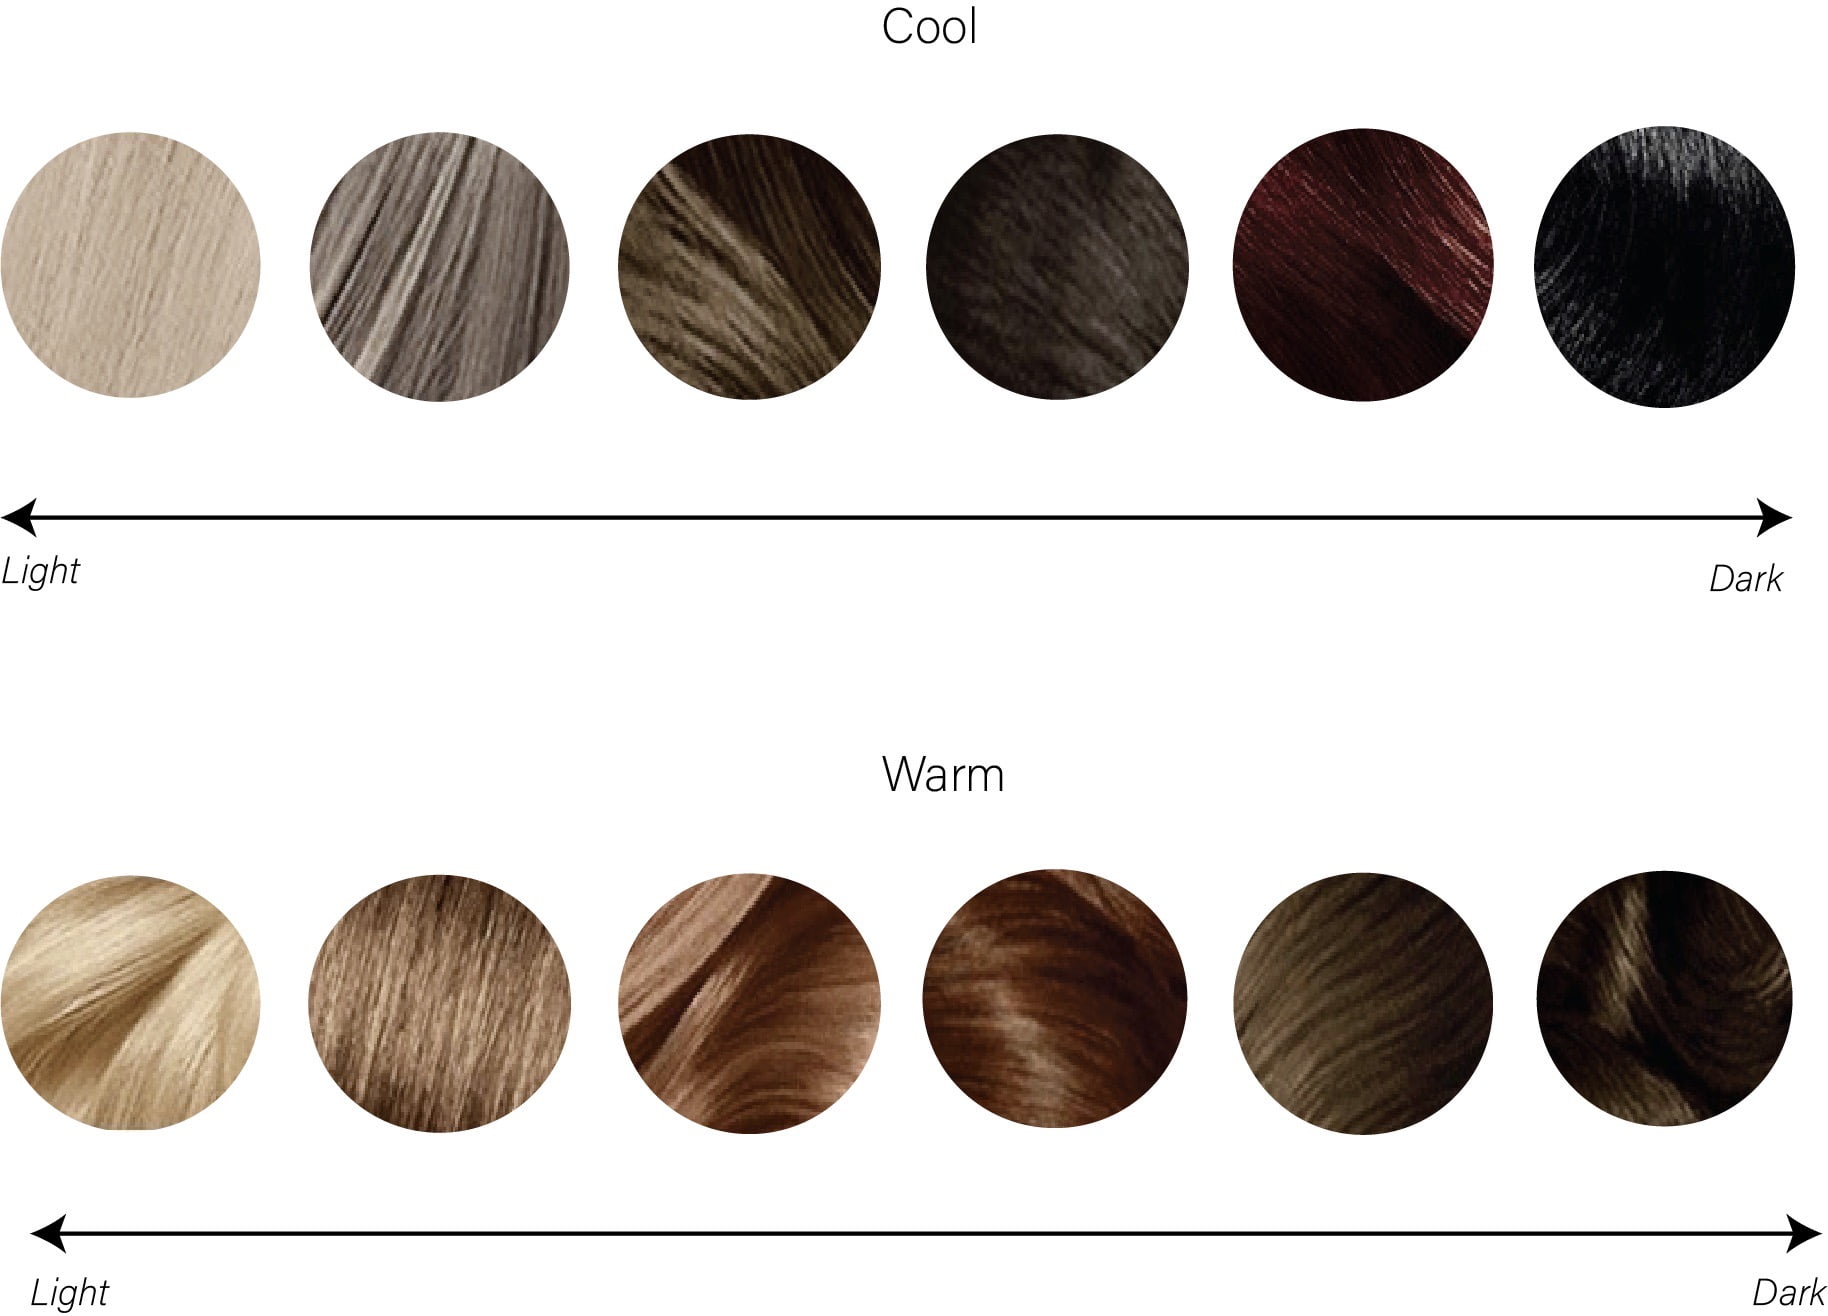 warm and cool hair colours seasonal colour analysis example